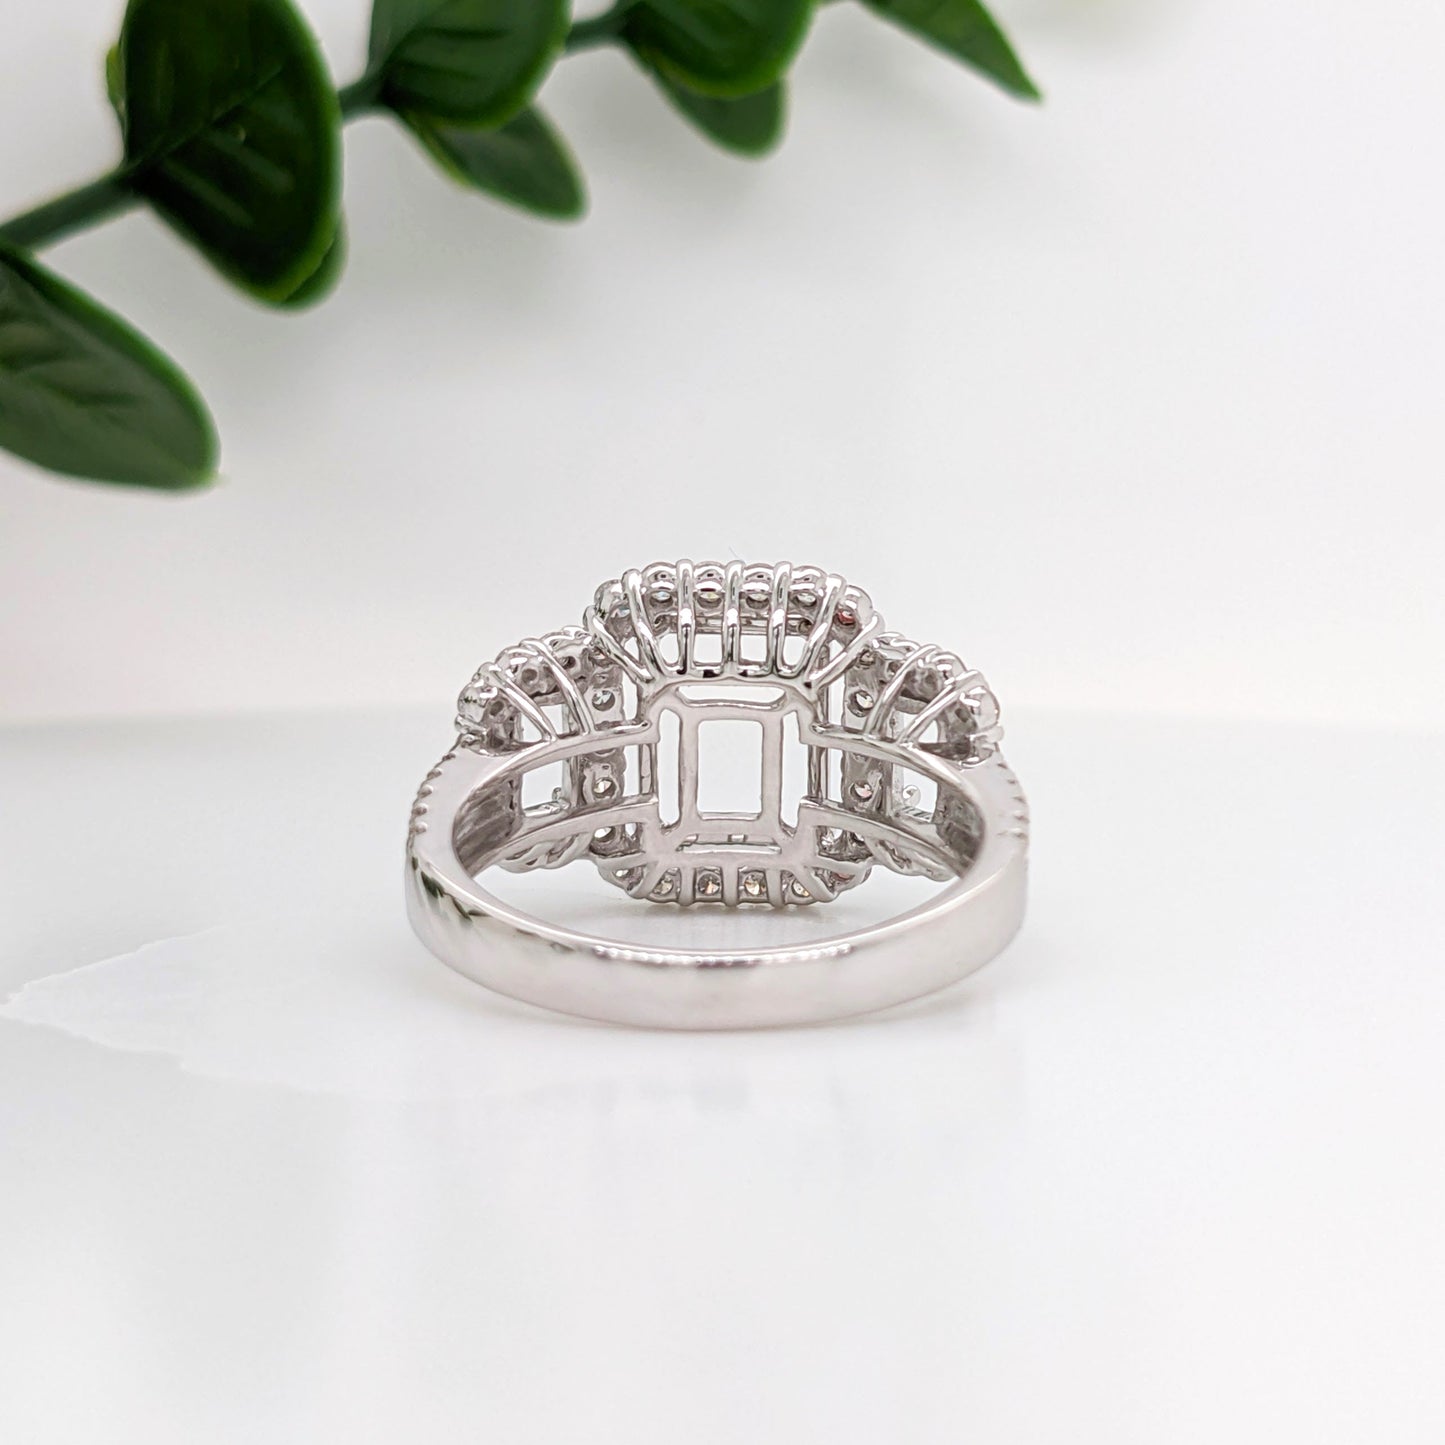 Celeste Collection | Three Stone Ring with 2 Baguette Baskets and a Center Emerald Basket with a Diamond Halo | Ring Setting in 14k Solid Gold w Pave Split Shank | Emerald Cut